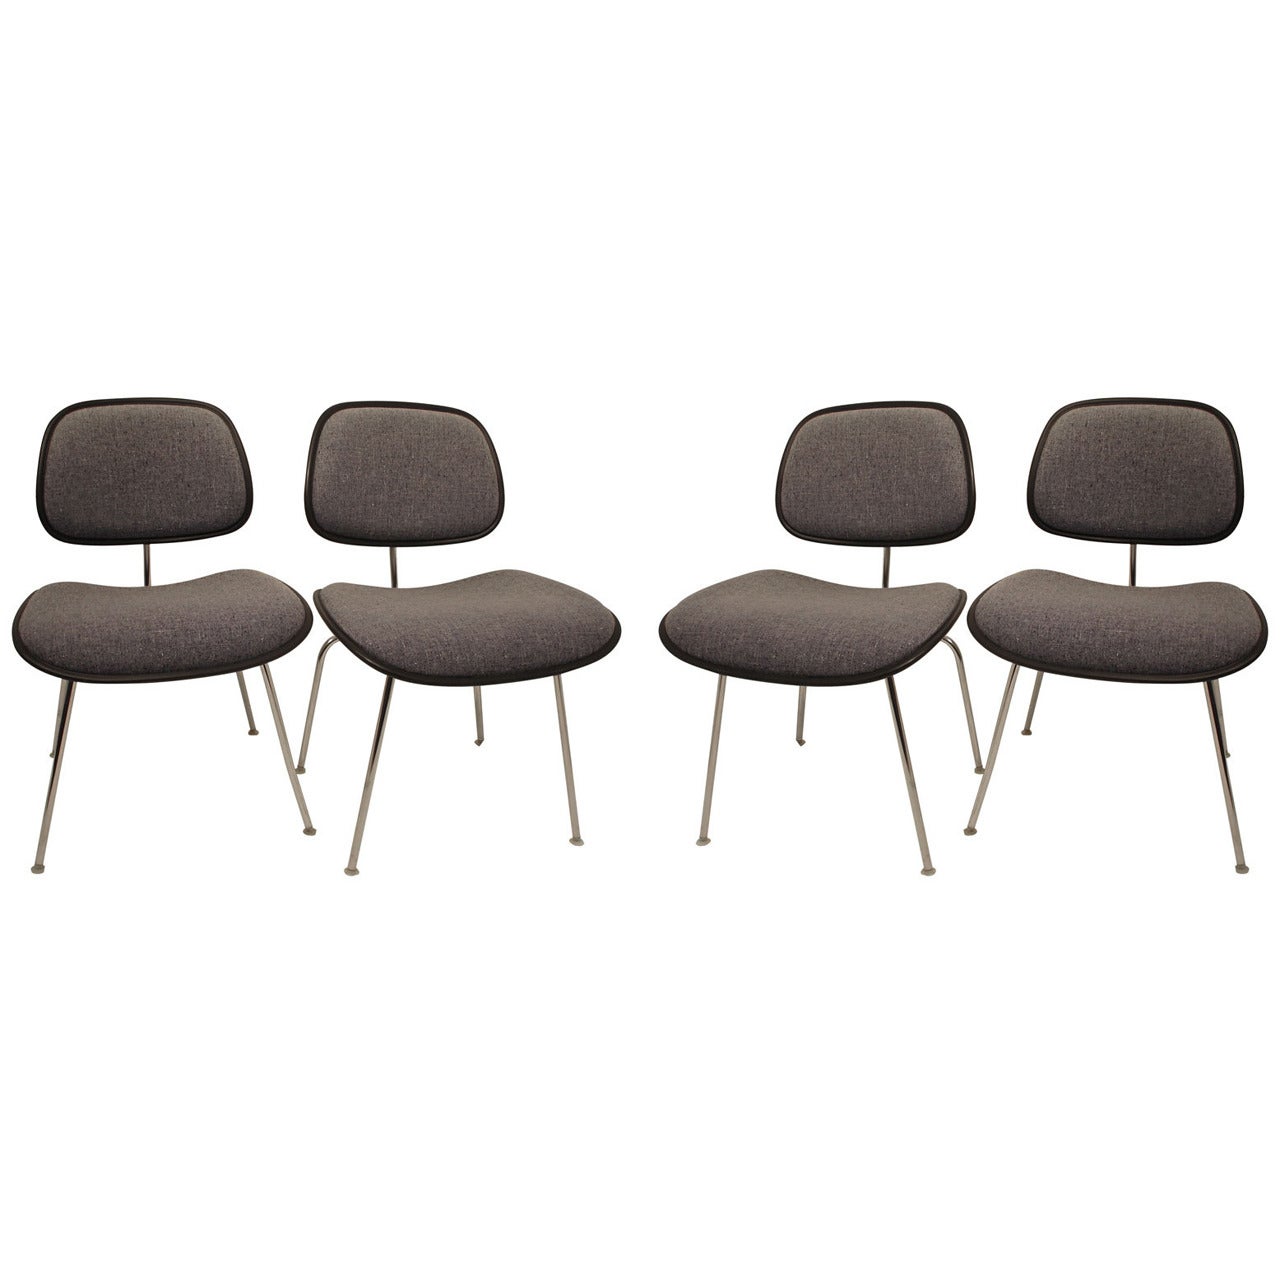 Set of 4 Charles Eames for Herman Miller DCM Chairs